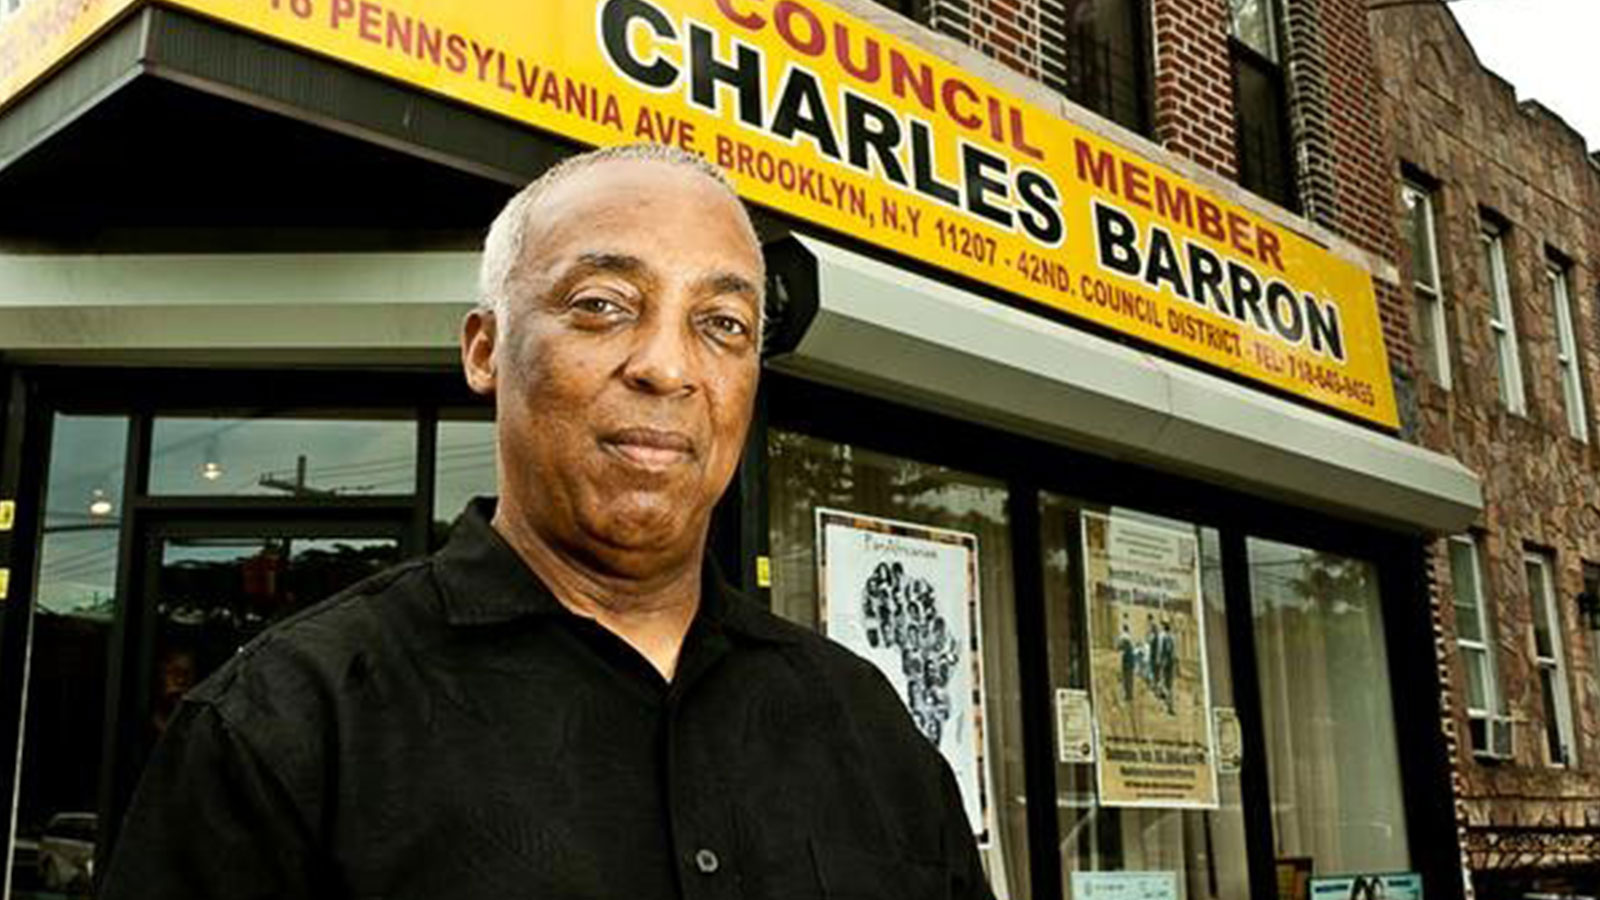 Charles Barron is back: His unique rise to power, East New York’s forgotten socialist dynasty, and the never ending narrative wars